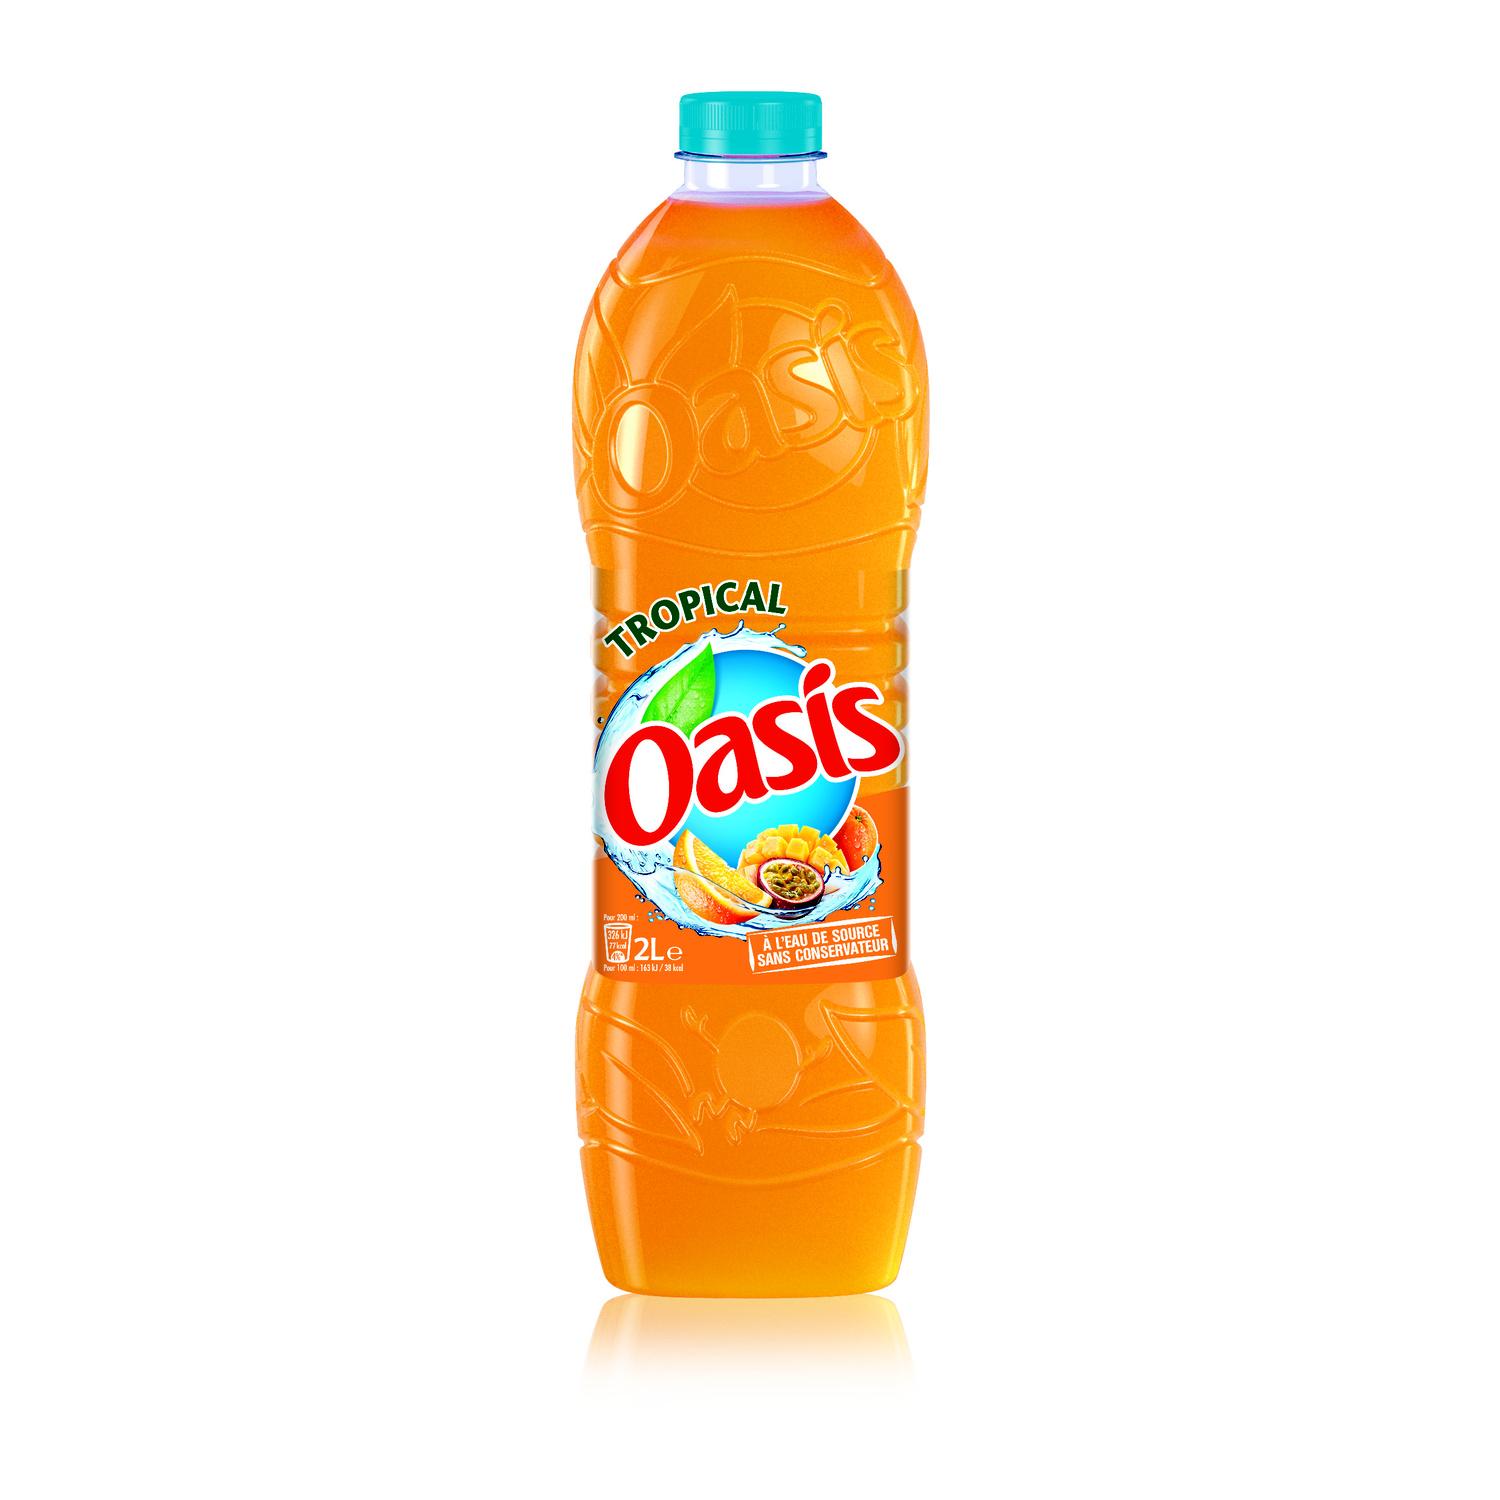 Oasis Tropical Drink